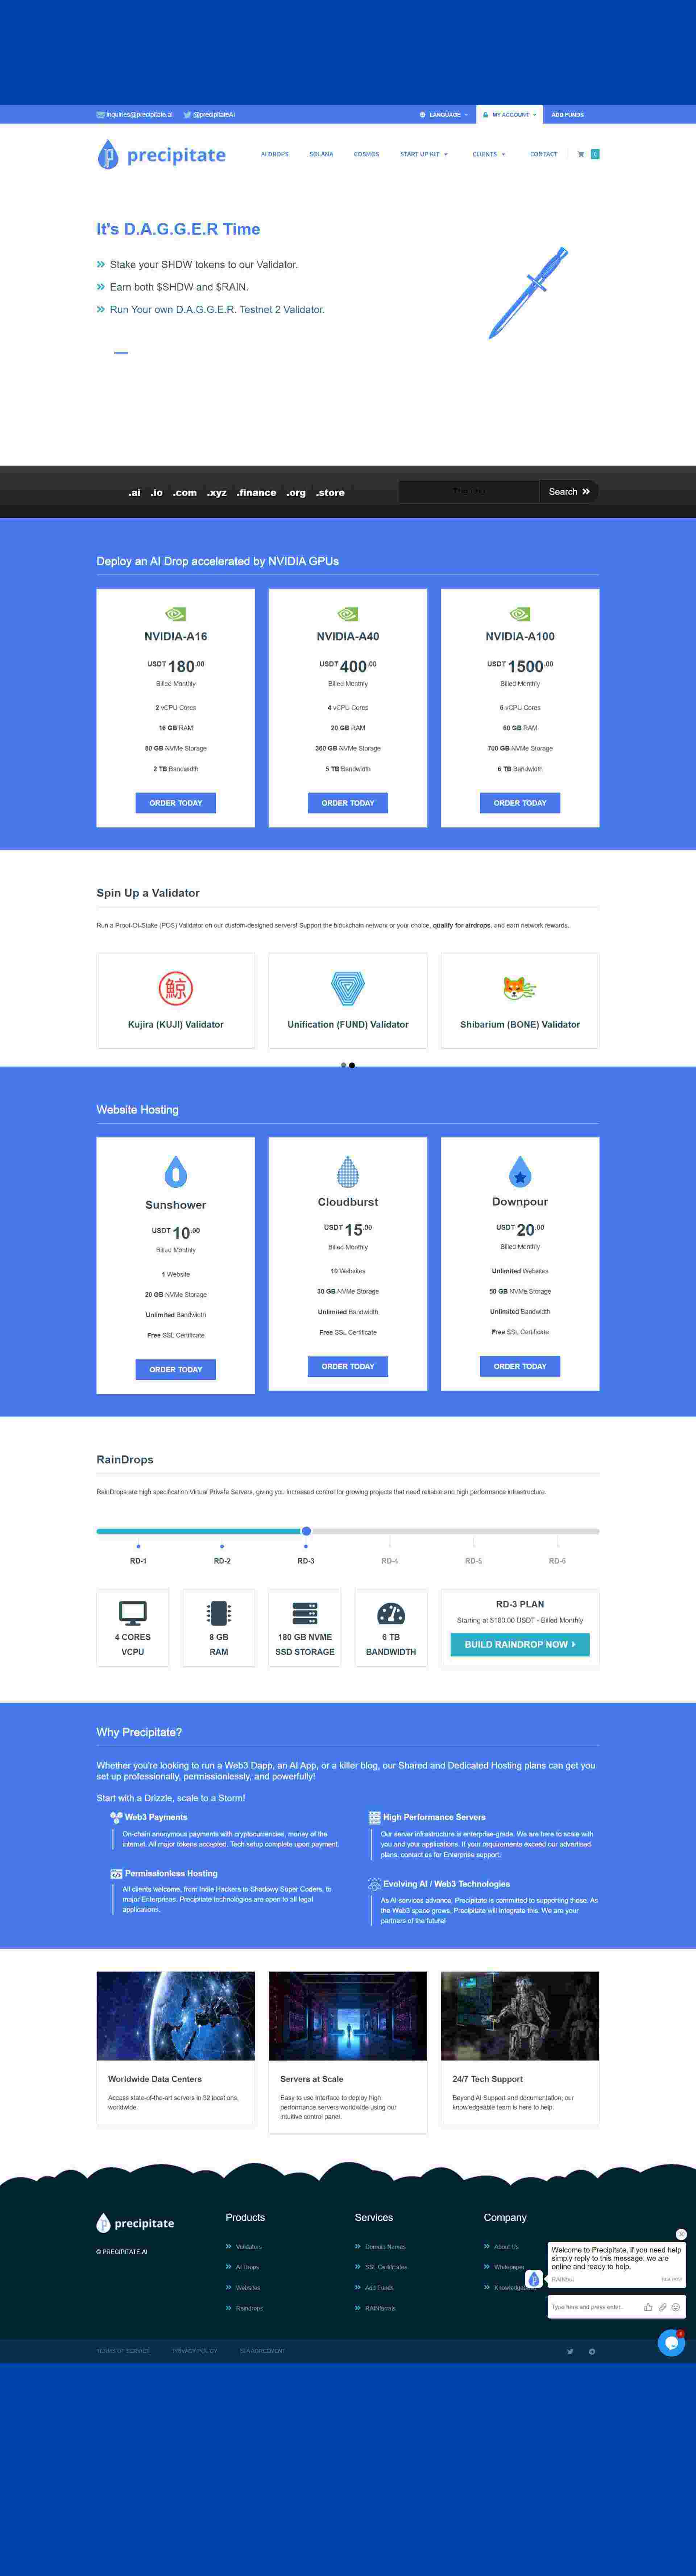 Preview of  Precipitate's WHMCS website with a focus on hosting services and user interface 